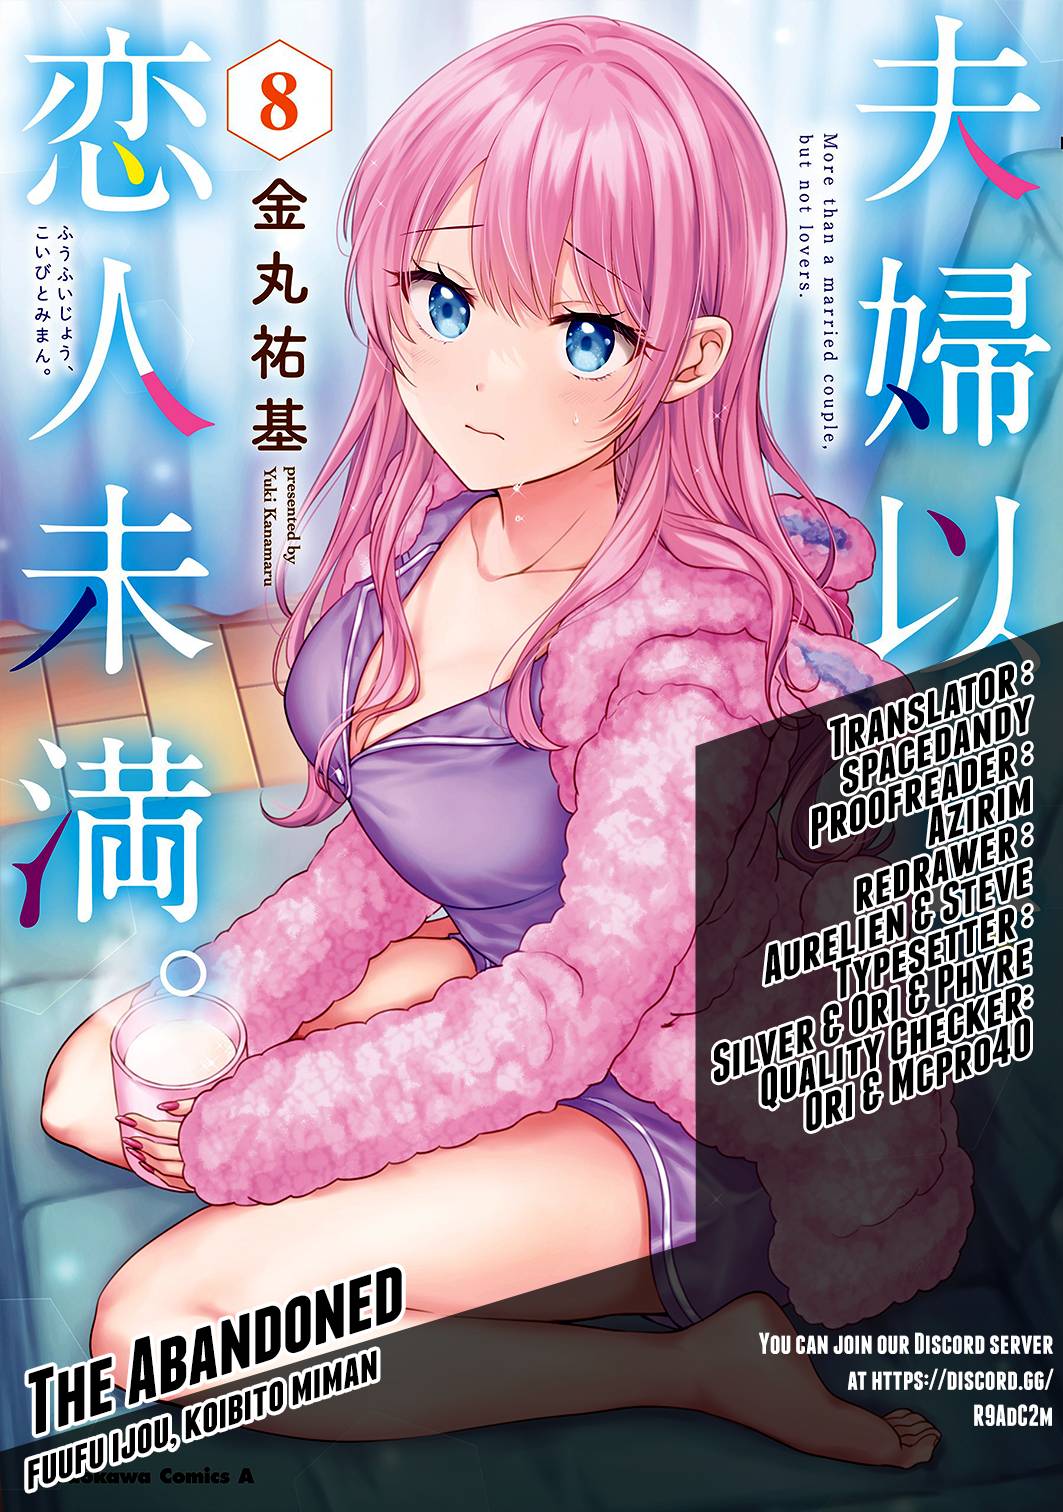 More than a married couple, but not lovers. Manga - Read Manga Online Free